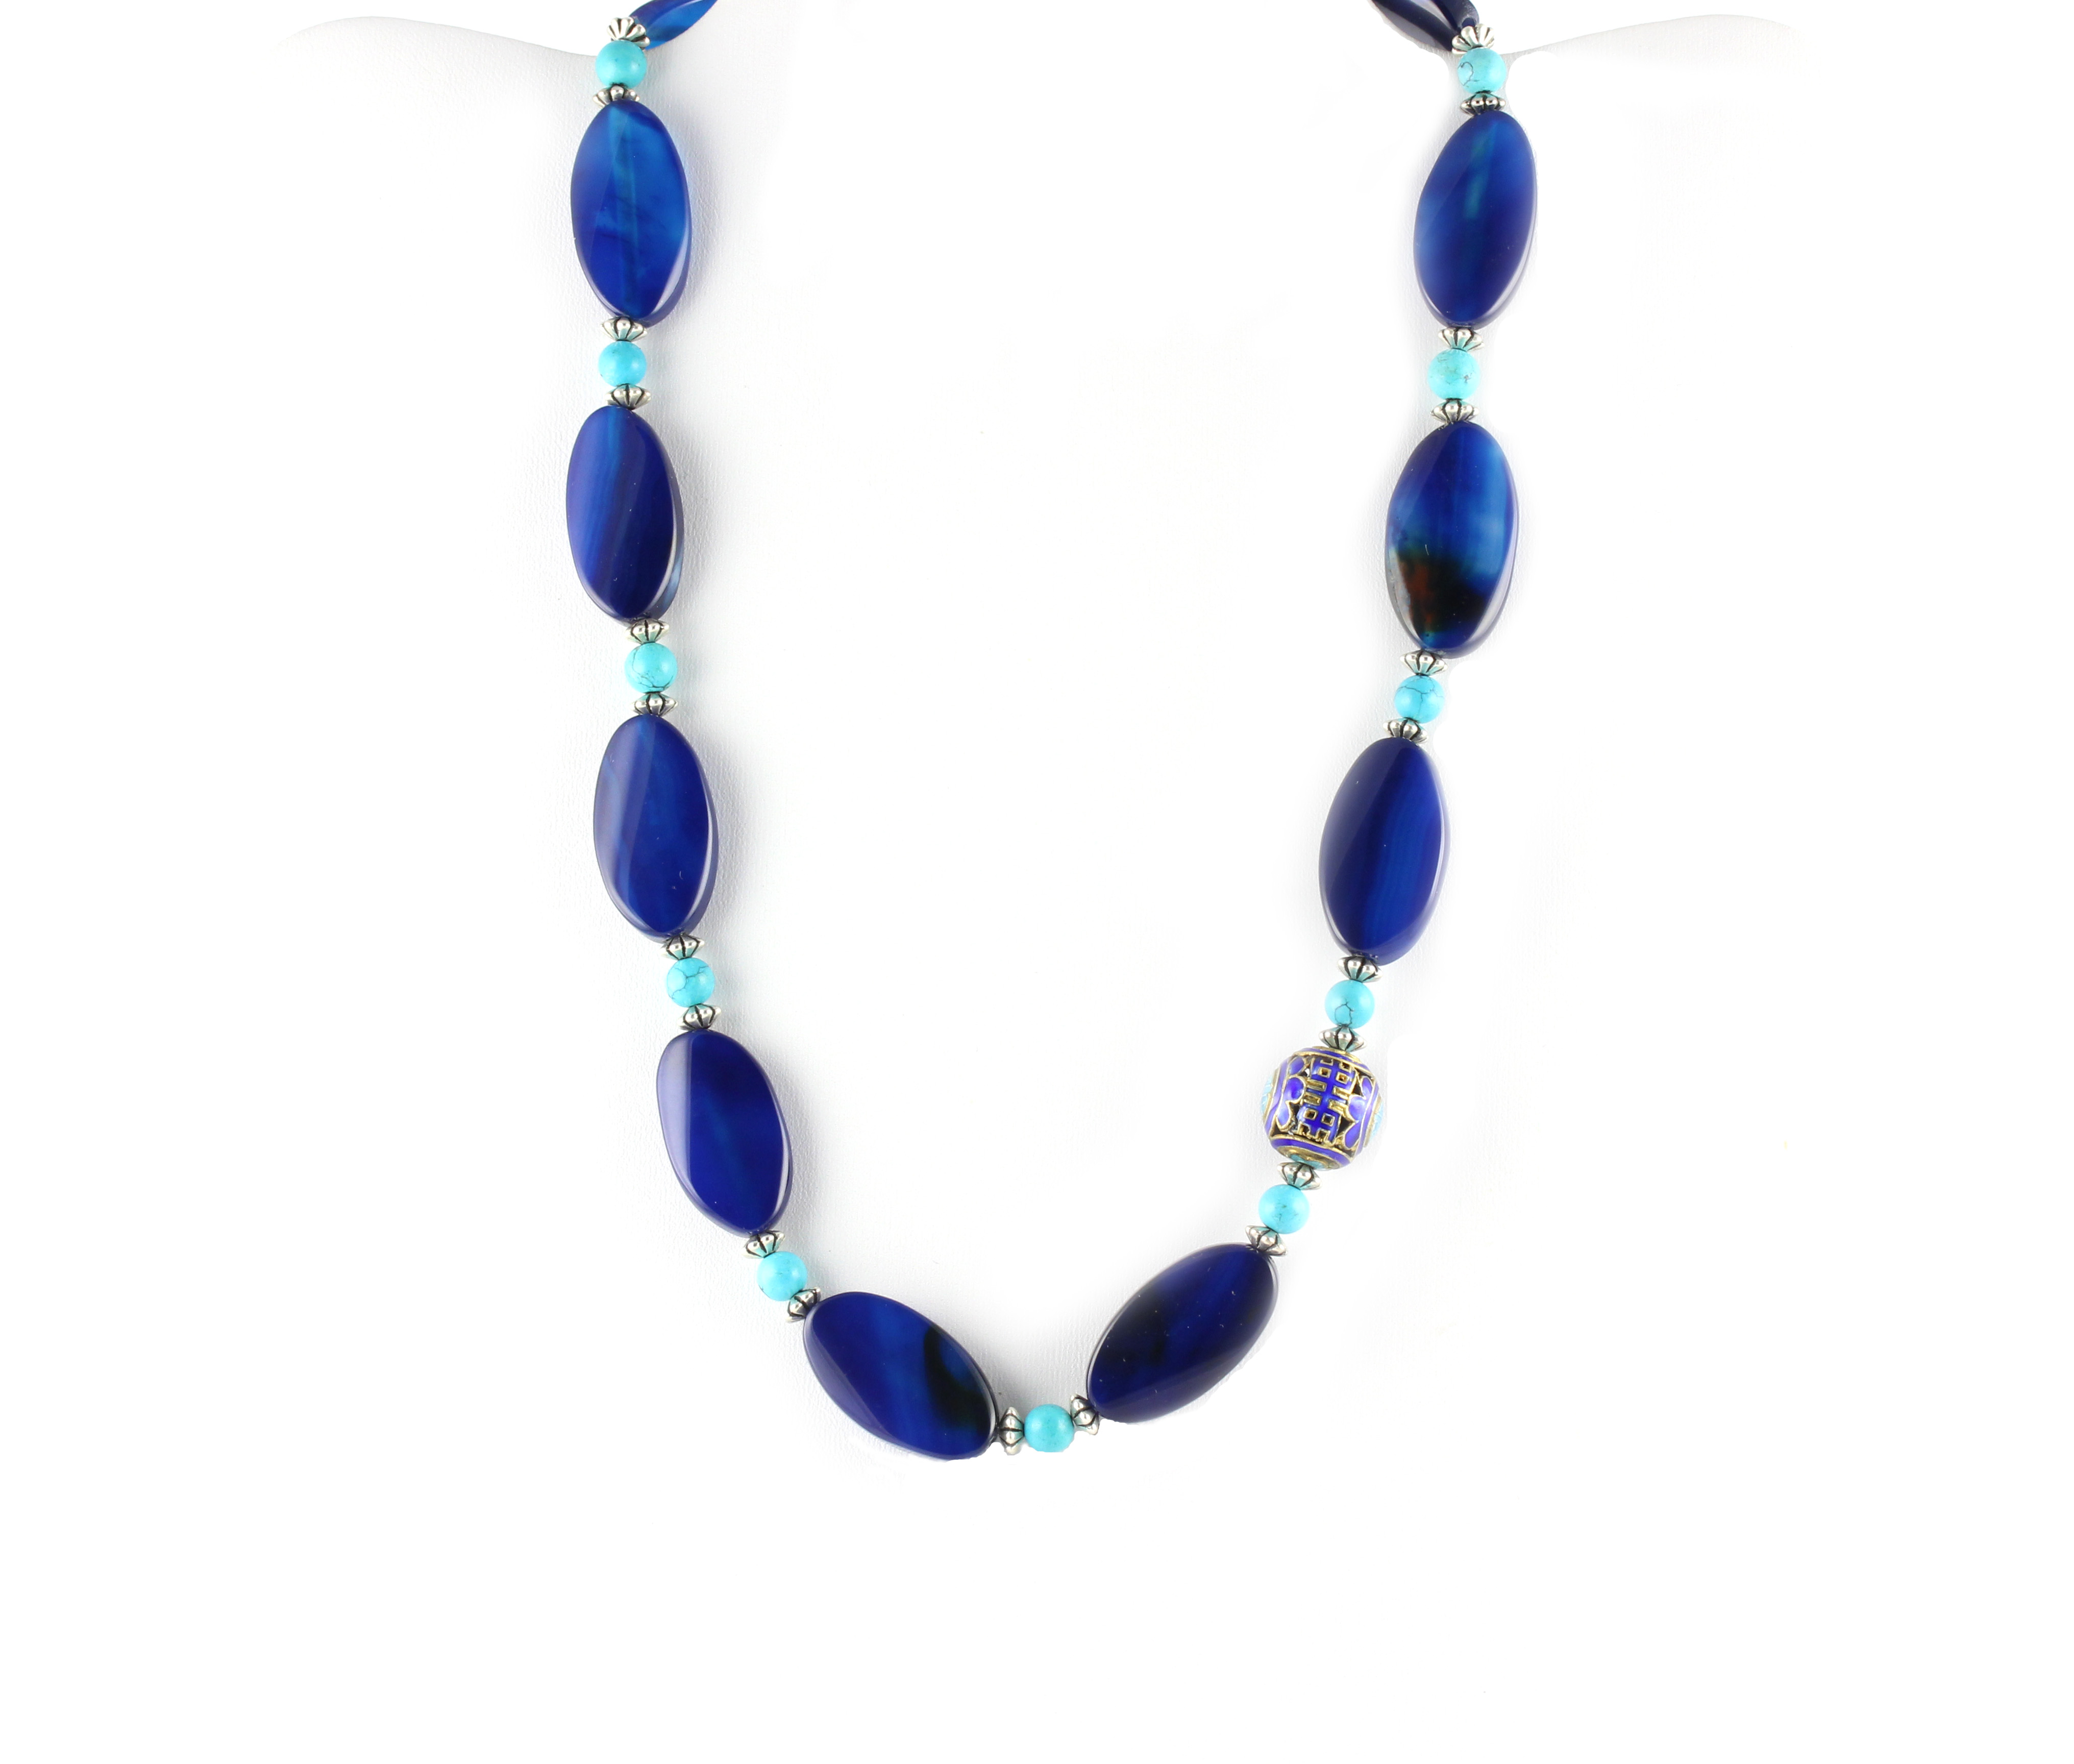 Electric Blue Necklace with a Touch of Turquoise and Cloisonné Focal